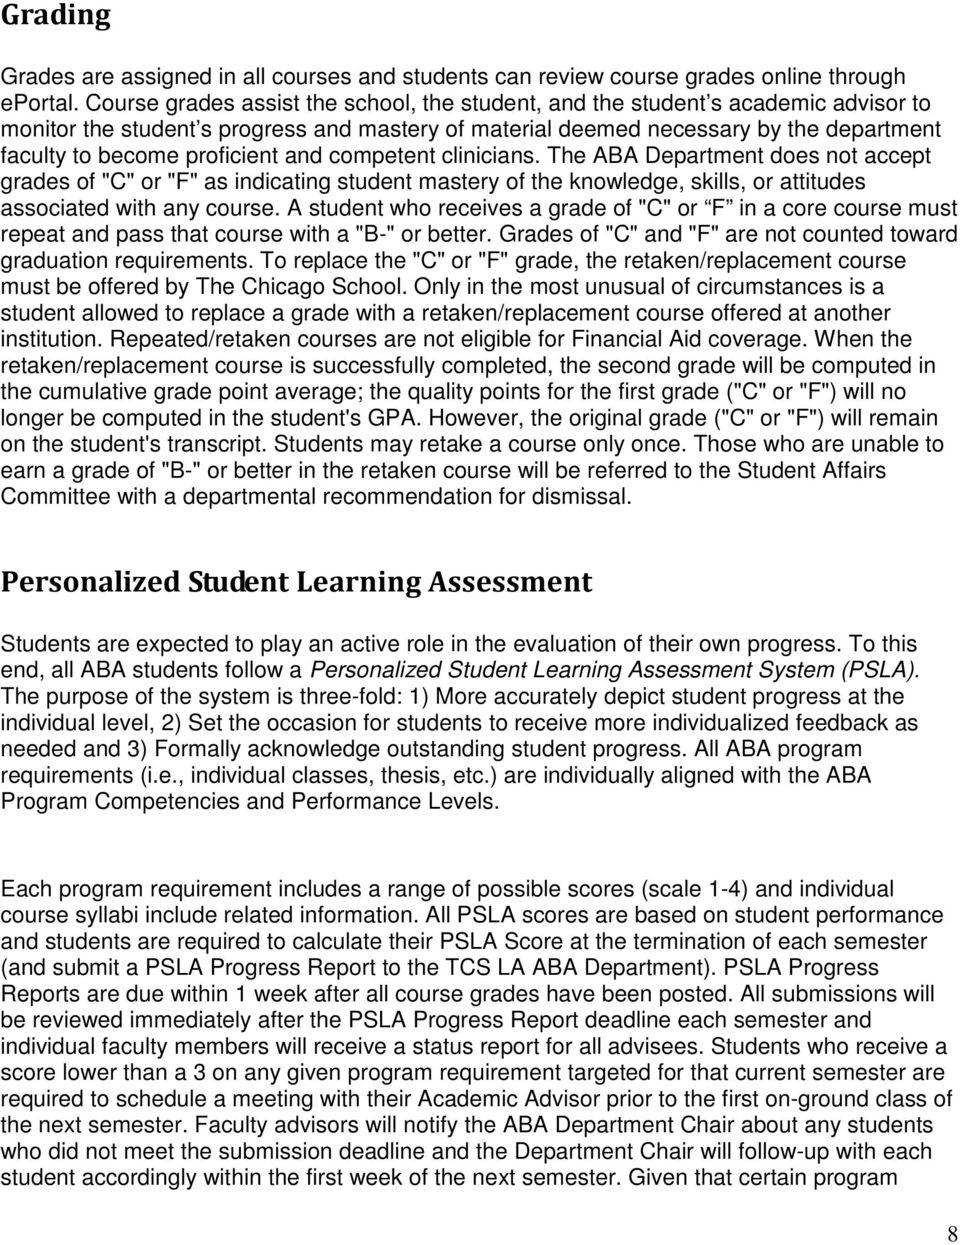 proficient and competent clinicians. The ABA Department does not accept grades of "C" or "F" as indicating student mastery of the knowledge, skills, or attitudes associated with any course.